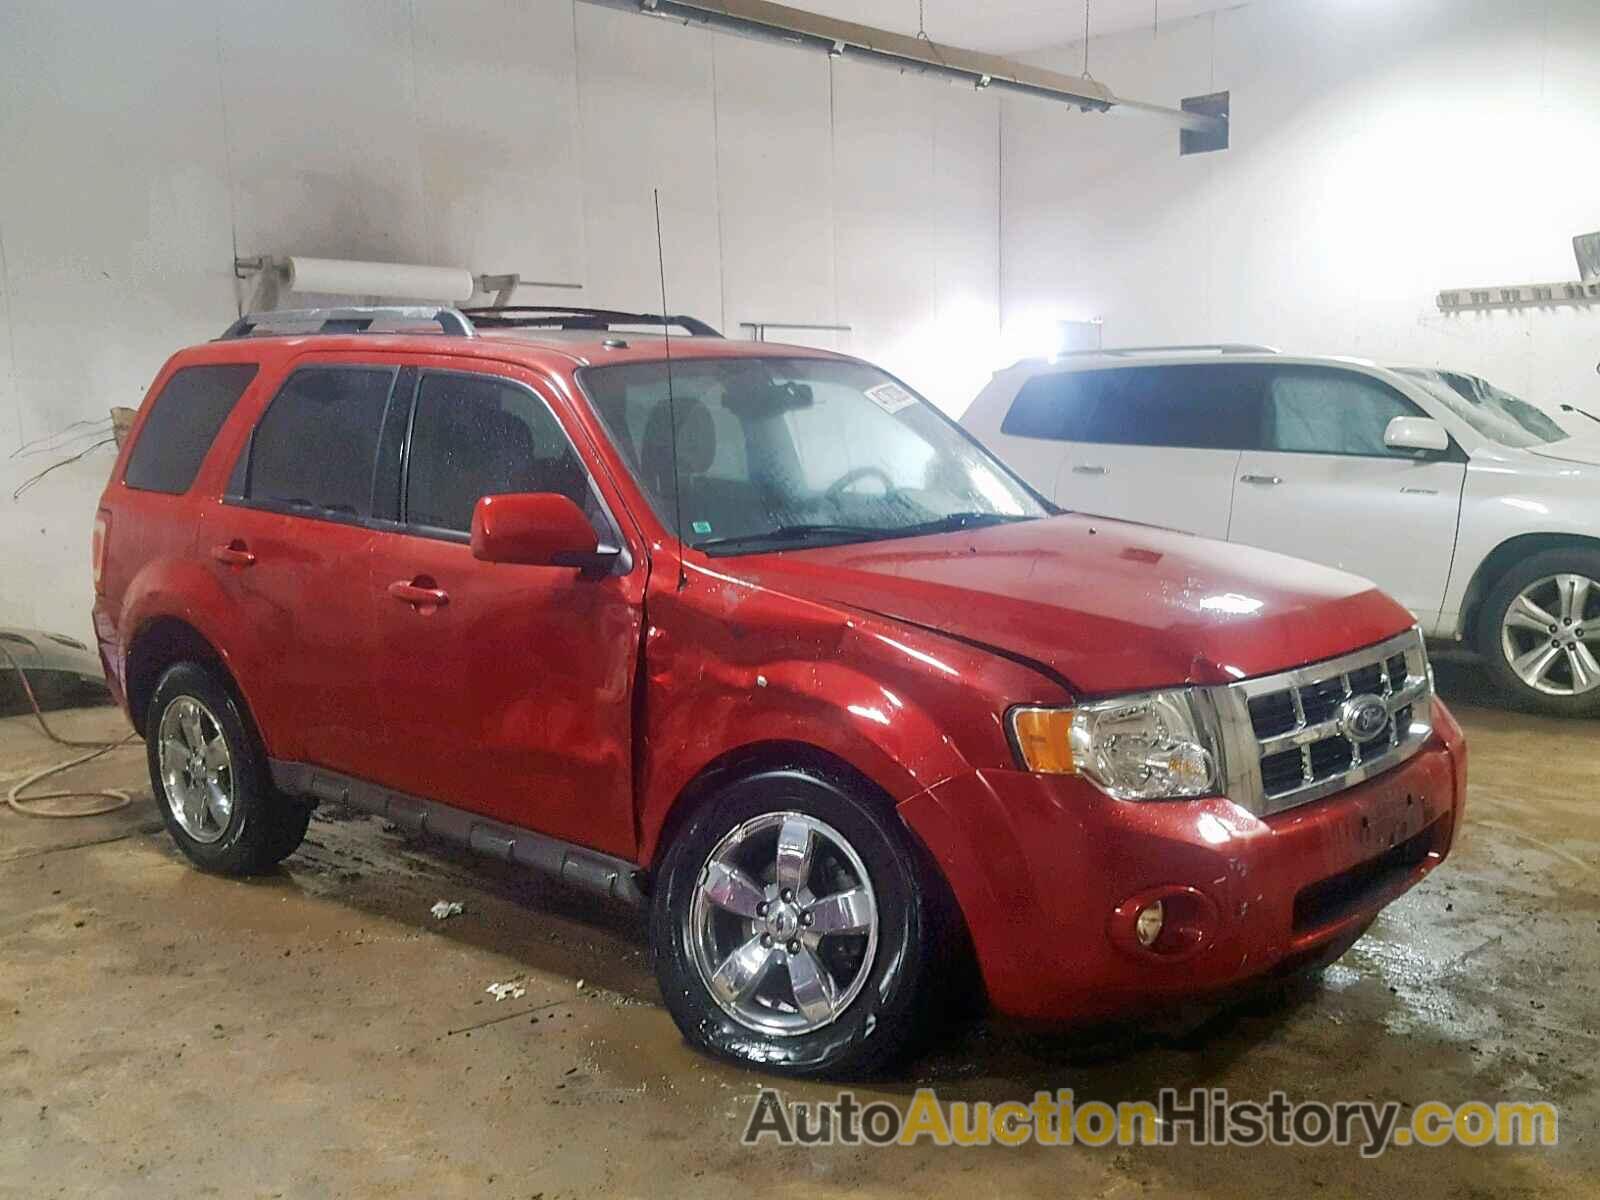 2009 FORD ESCAPE LIMITED, 1FMCU04759KC57340